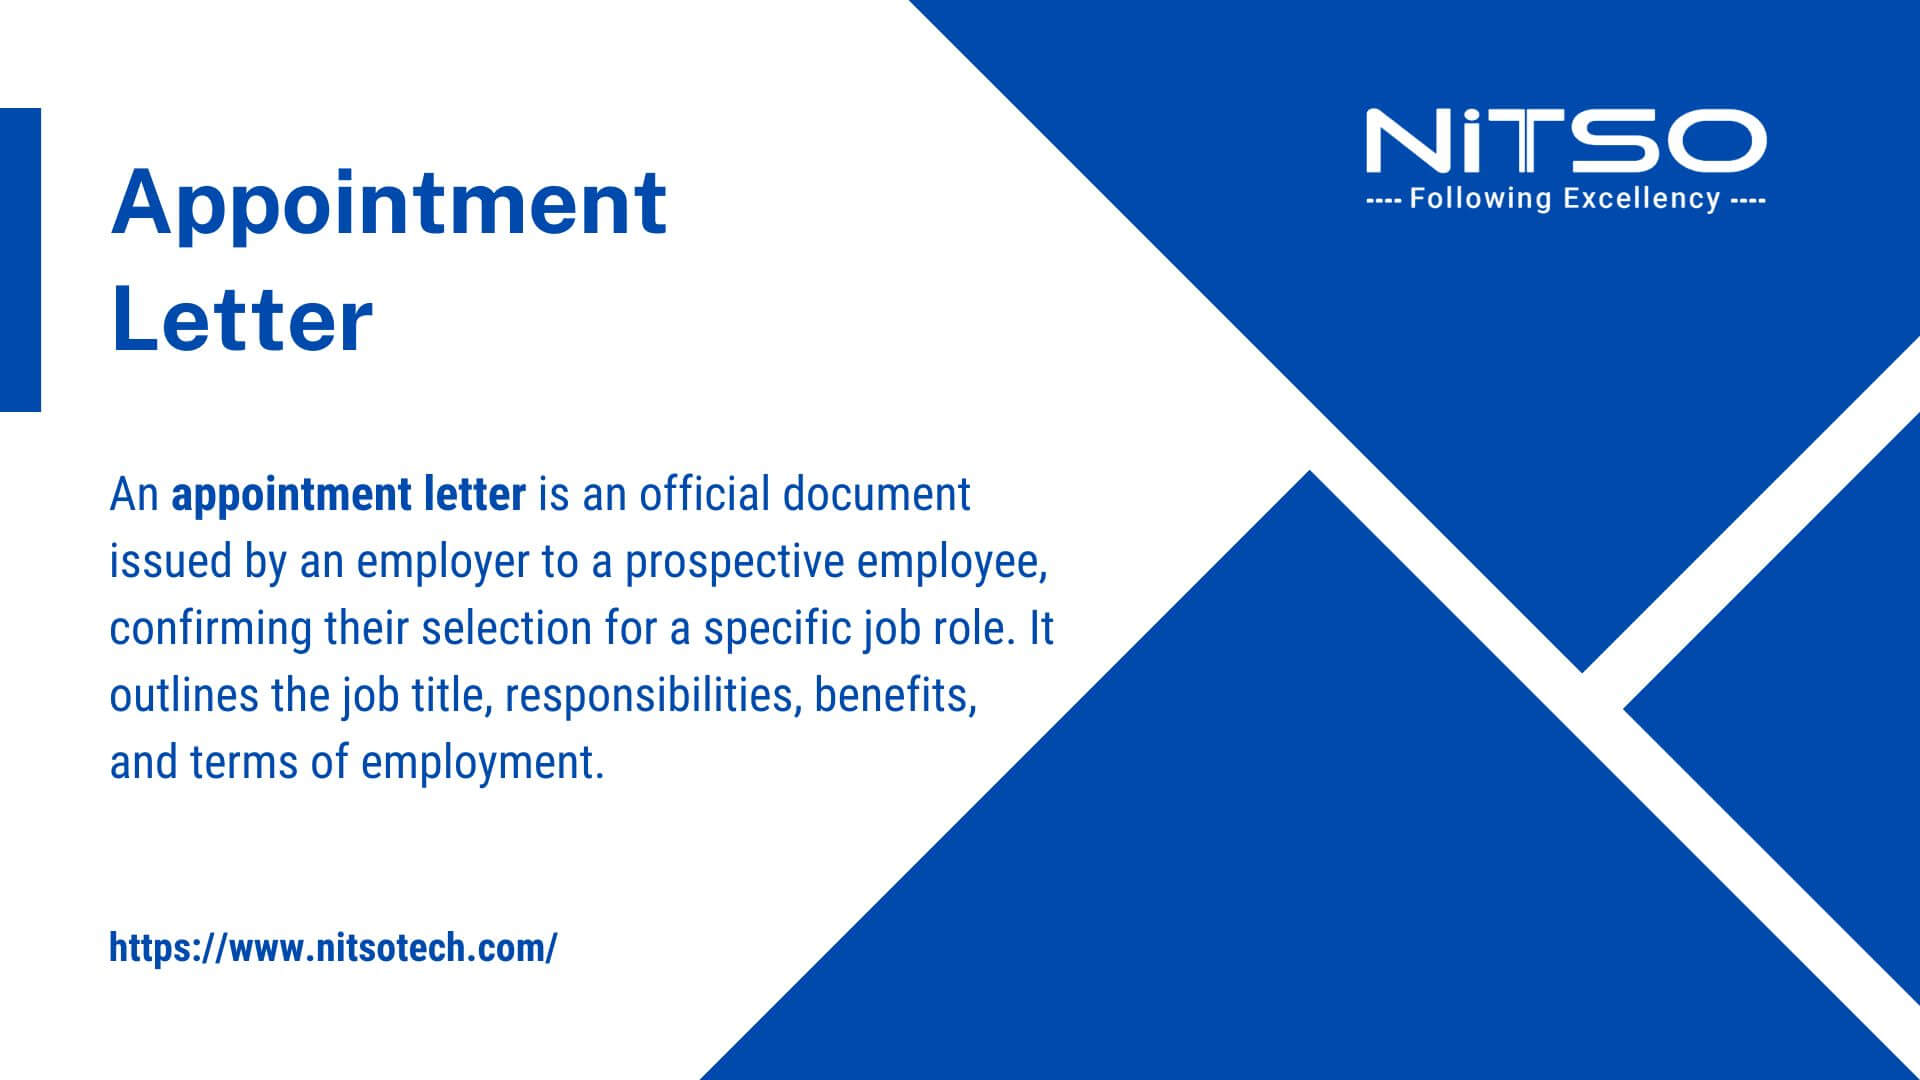 What Is an Appointment Letter?